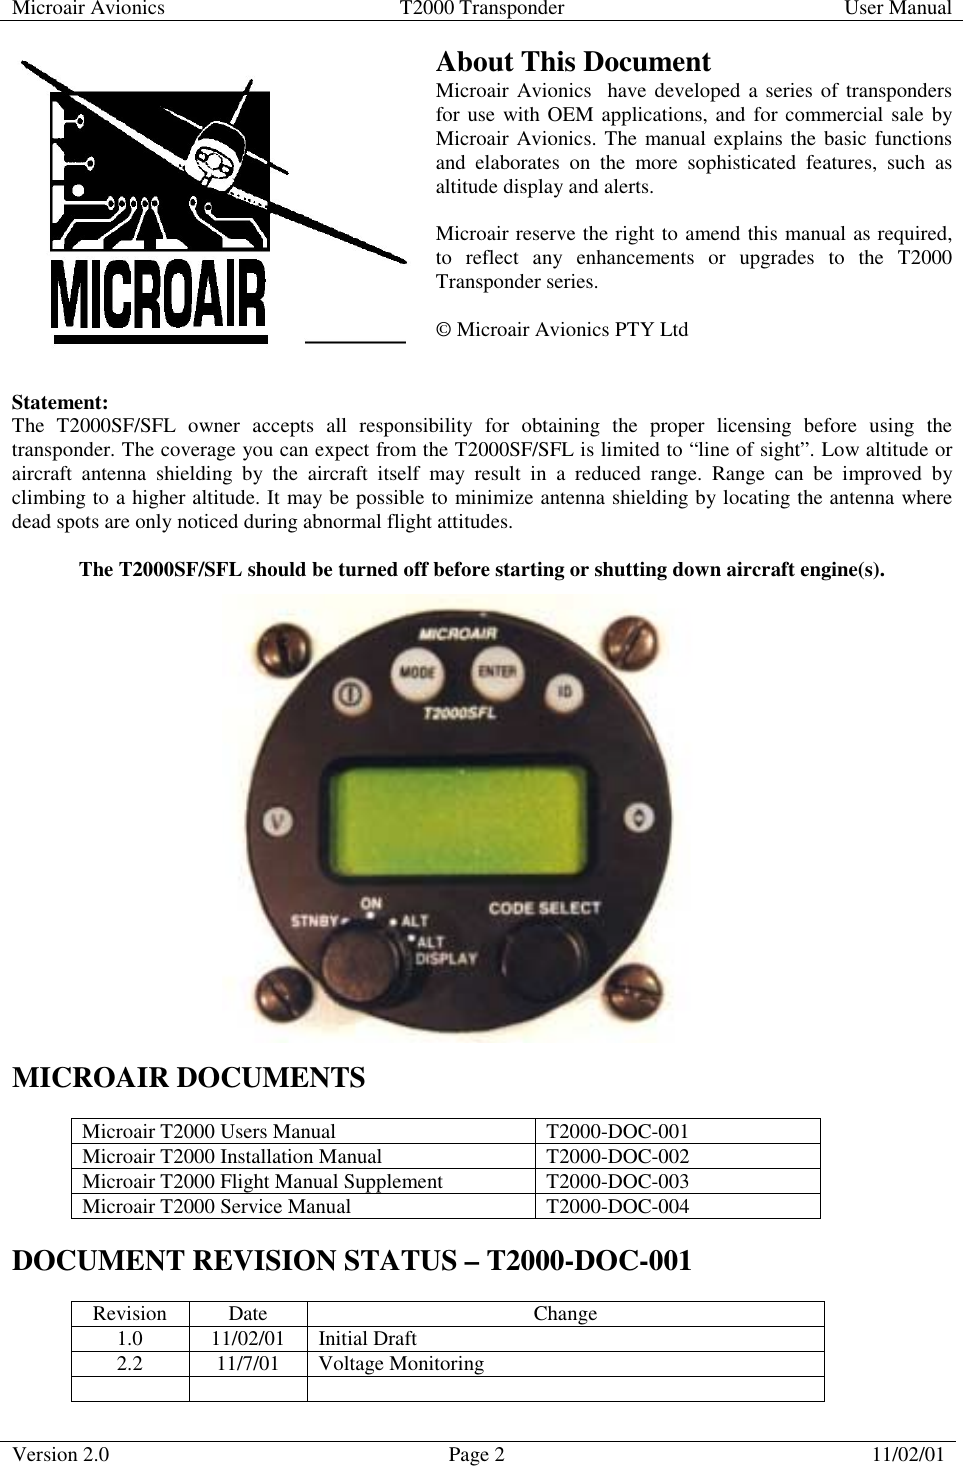 Microair Avionics  T2000 Transponder  User Manual  Version 2.0  Page 2  11/02/01     About This Document Microair Avionics  have developed a series of transponders for use with OEM applications, and for commercial sale by Microair Avionics. The manual explains the basic functions and elaborates on the more sophisticated features, such as altitude display and alerts.   Microair reserve the right to amend this manual as required, to reflect any enhancements or upgrades to the T2000 Transponder series.  © Microair Avionics PTY Ltd   Statement:  The T2000SF/SFL owner accepts all responsibility for obtaining the proper licensing before using the transponder. The coverage you can expect from the T2000SF/SFL is limited to “line of sight”. Low altitude or aircraft antenna shielding by the aircraft itself may result in a reduced range. Range can be improved by climbing to a higher altitude. It may be possible to minimize antenna shielding by locating the antenna where dead spots are only noticed during abnormal flight attitudes.  The T2000SF/SFL should be turned off before starting or shutting down aircraft engine(s).                     MICROAIR DOCUMENTS  Microair T2000 Users Manual  T2000-DOC-001 Microair T2000 Installation Manual  T2000-DOC-002 Microair T2000 Flight Manual Supplement  T2000-DOC-003 Microair T2000 Service Manual  T2000-DOC-004  DOCUMENT REVISION STATUS – T2000-DOC-001  Revision Date  Change 1.0 11/02/01 Initial Draft 2.2 11/7/01 Voltage Monitoring    